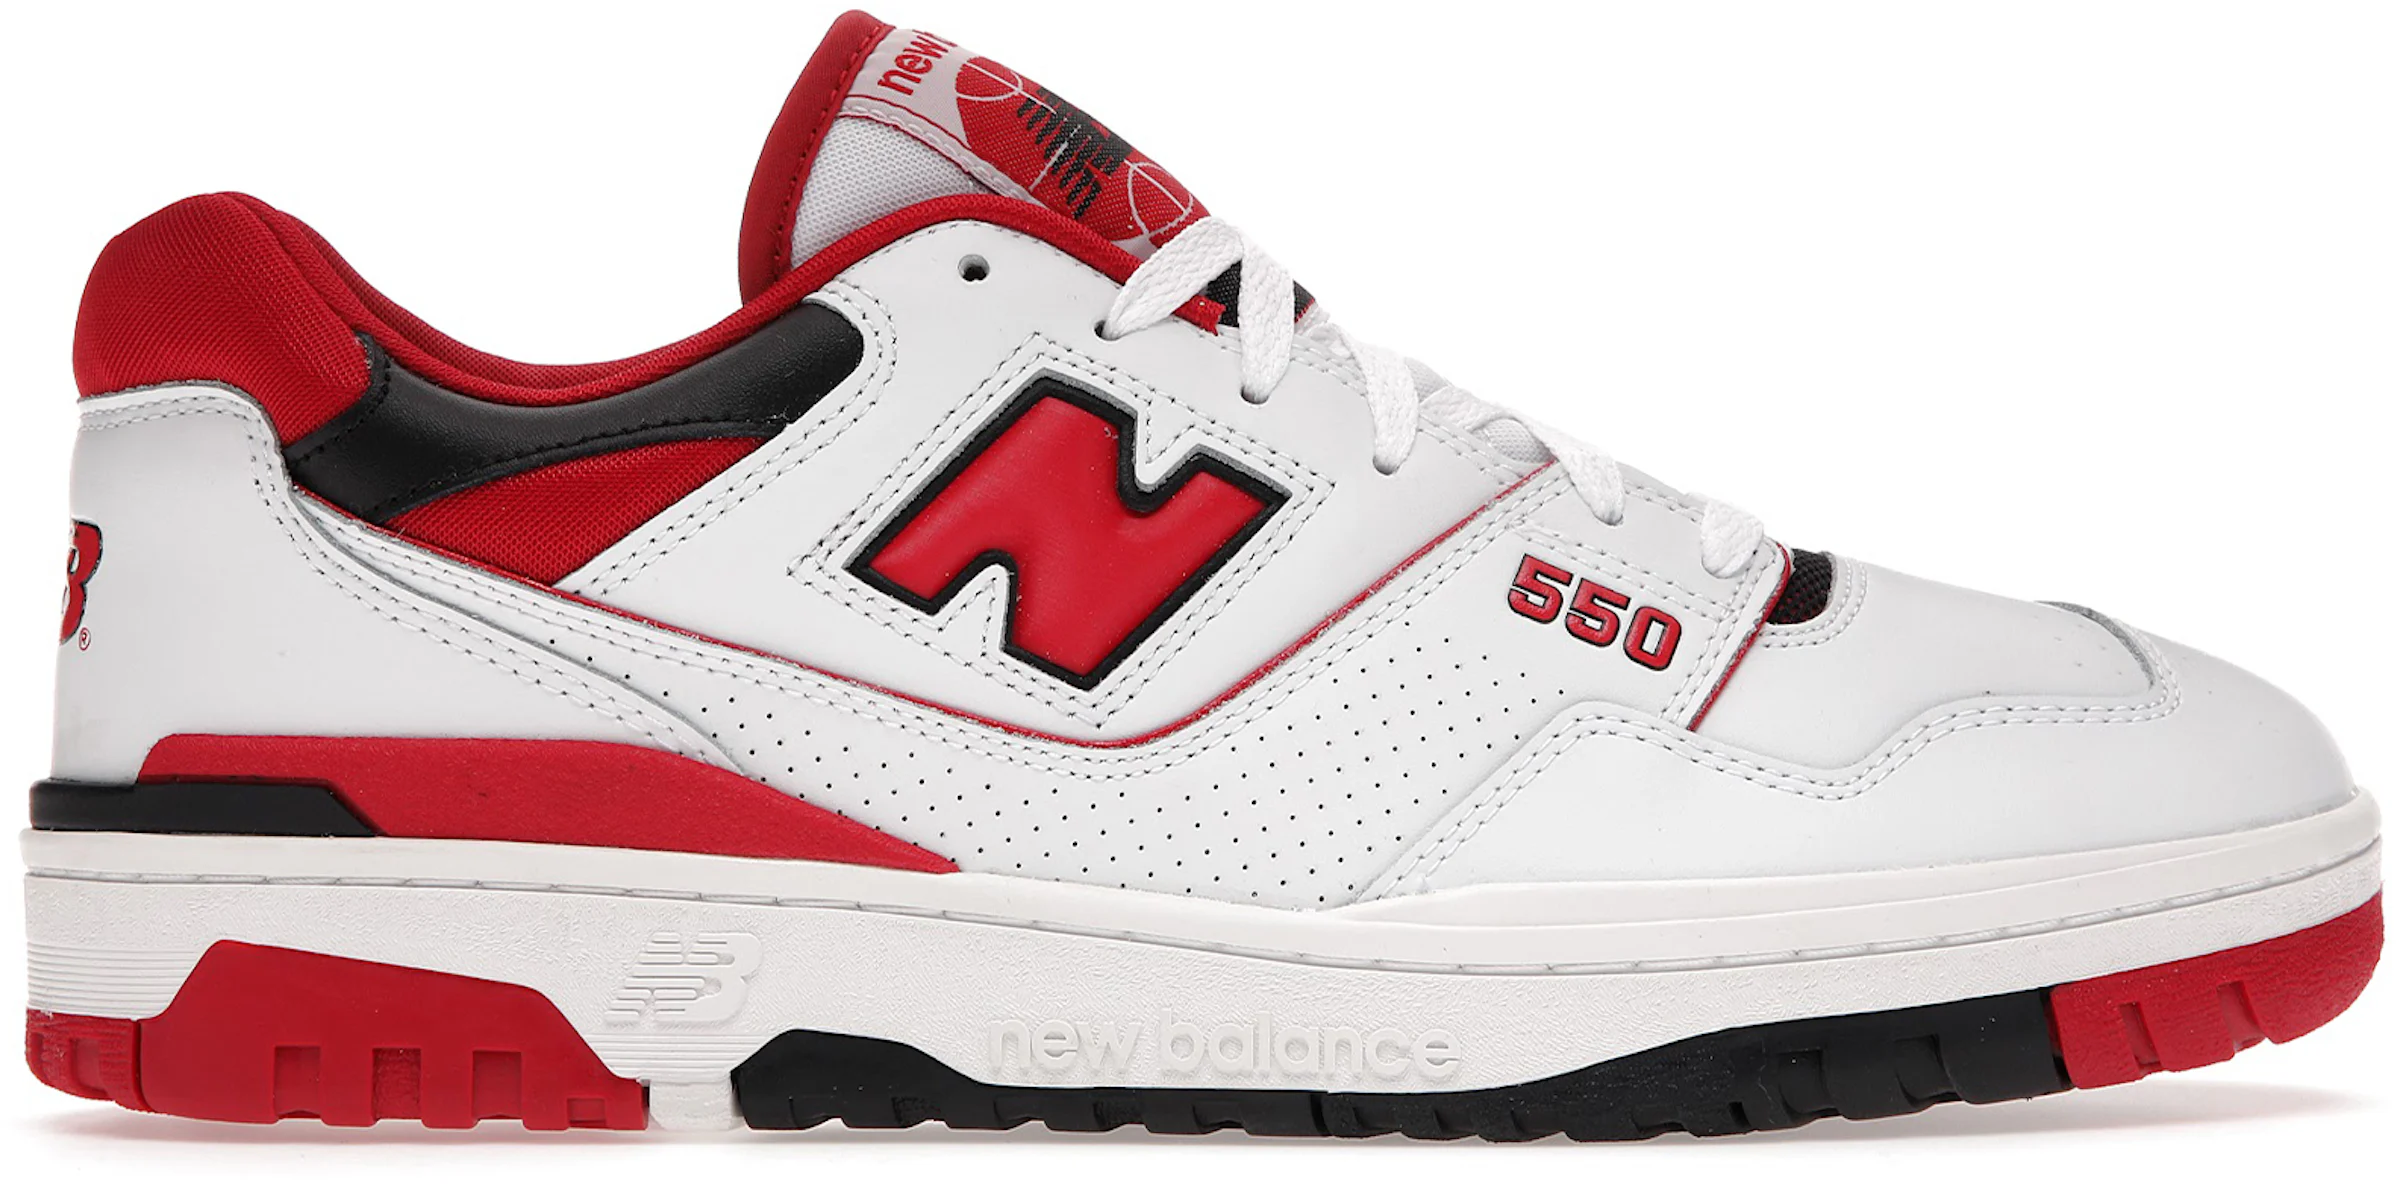 https://images.stockx.com/images/New-Balance-550-White-Red-Product.jpg?fit=fill&bg=FFFFFF&w=1200&h=857&fm=webp&auto=compress&dpr=2&trim=color&updated_at=1630617711&q=60